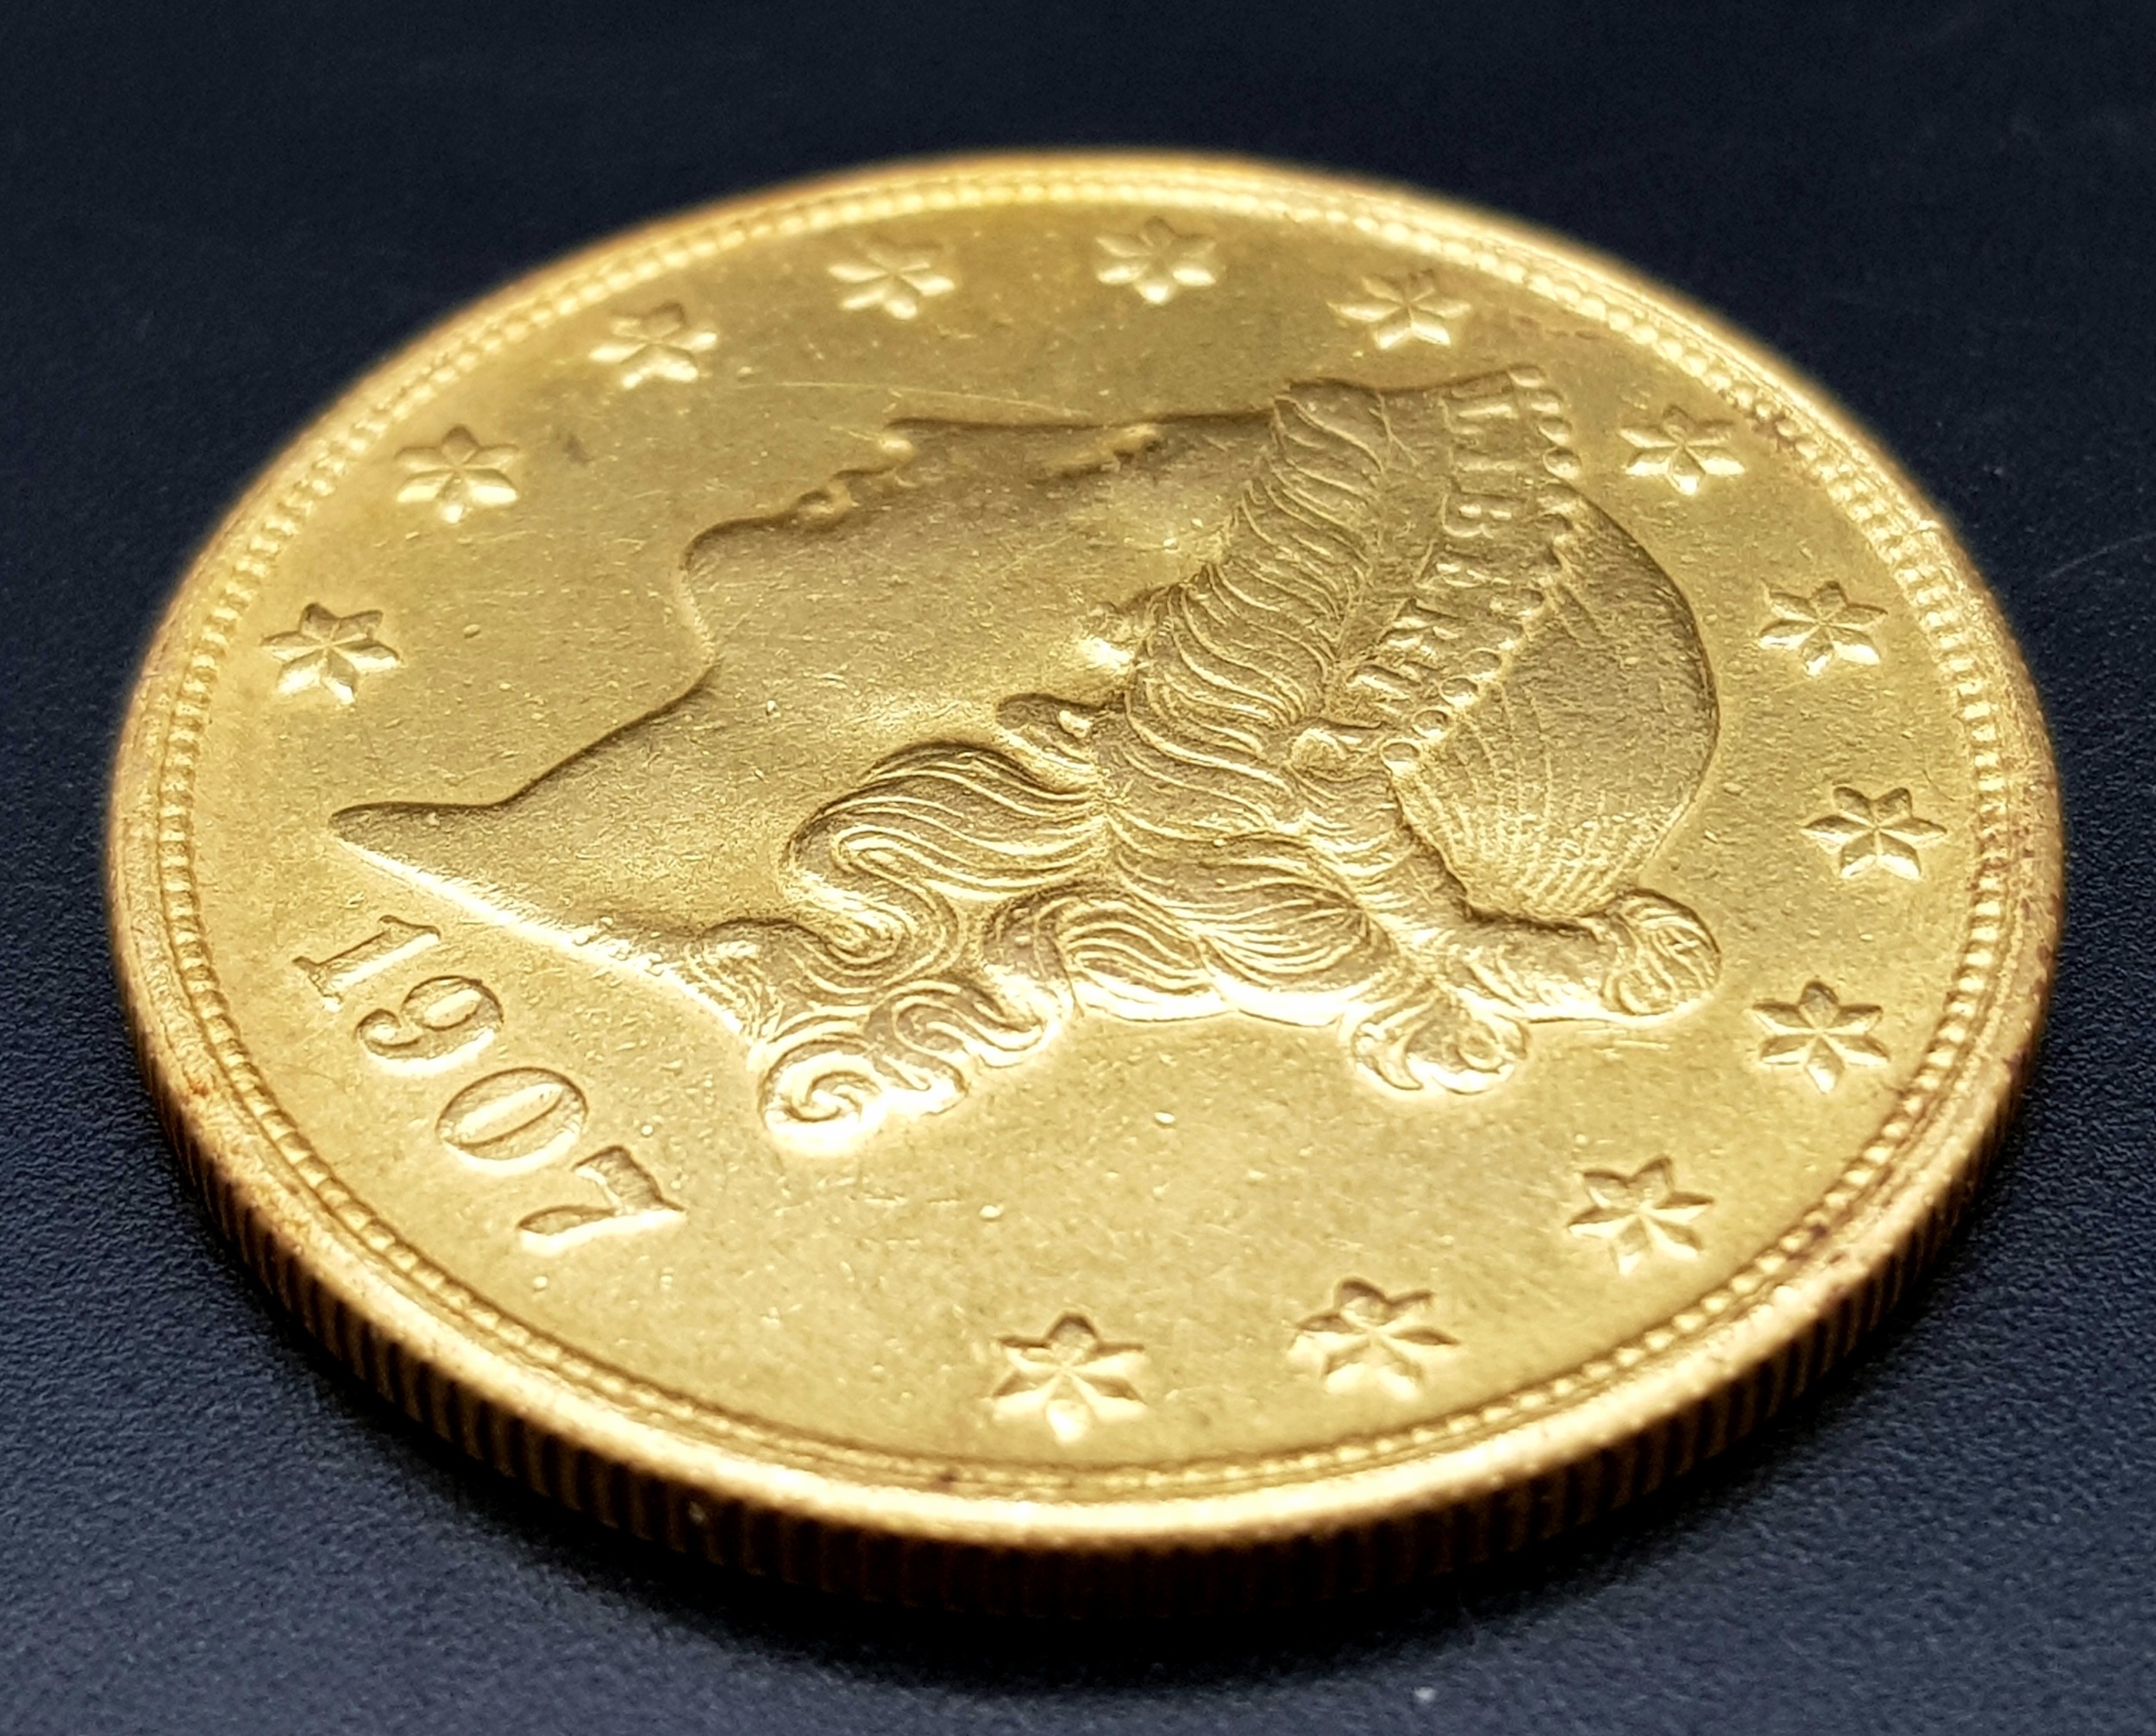 A $20 GOLD LIBERTY COIN DATED 1907 AND WEIGHING 33.43gms THIS COIN IS IN VERY GOOD CONDITION - Image 2 of 8